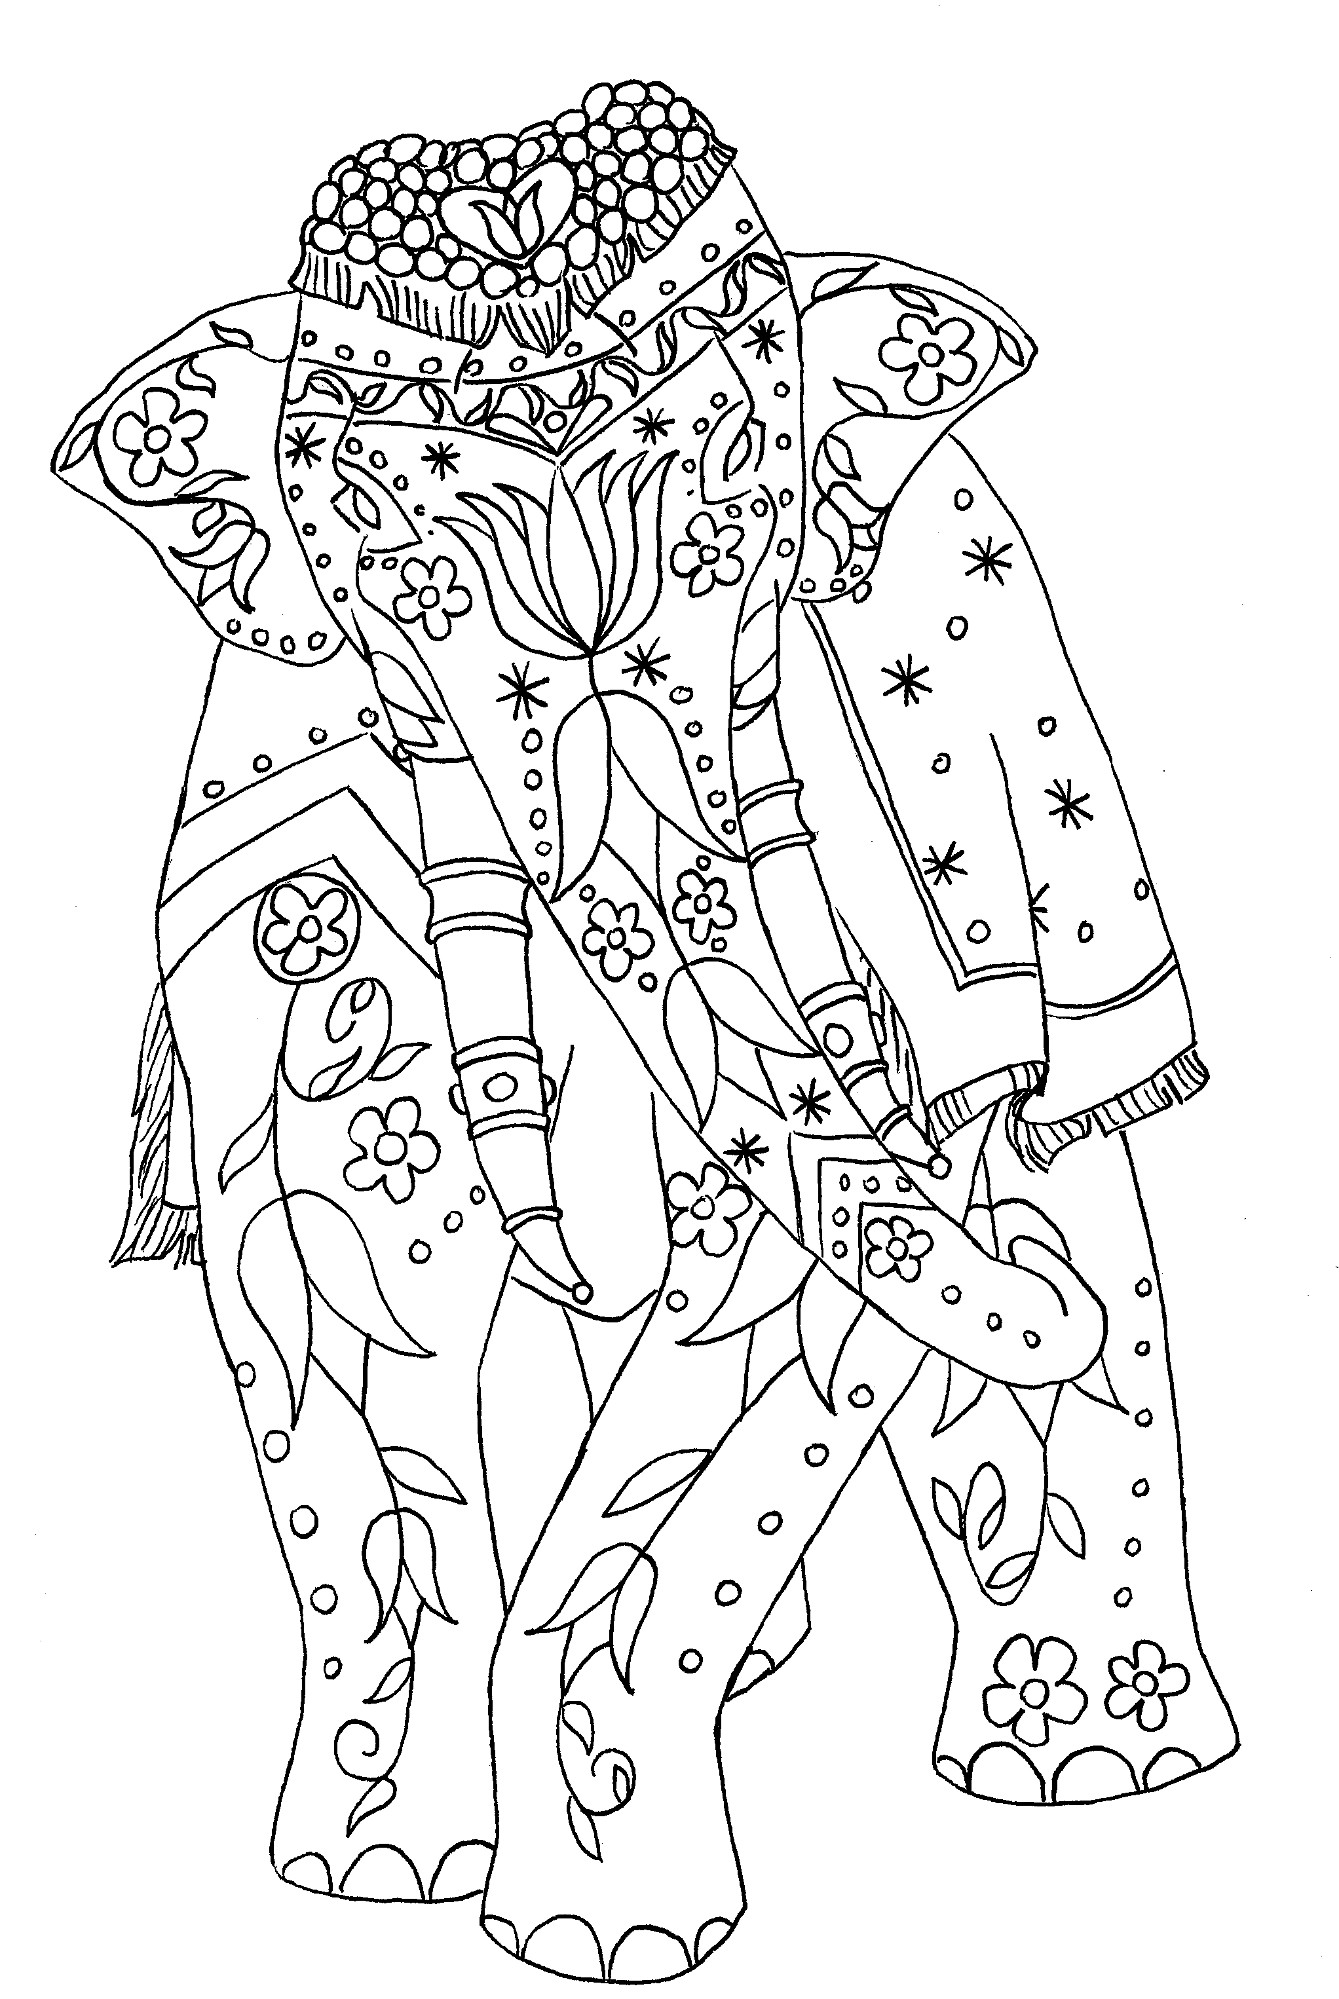 Coloring Pages For Adults Difficult Elephants Delicatessen